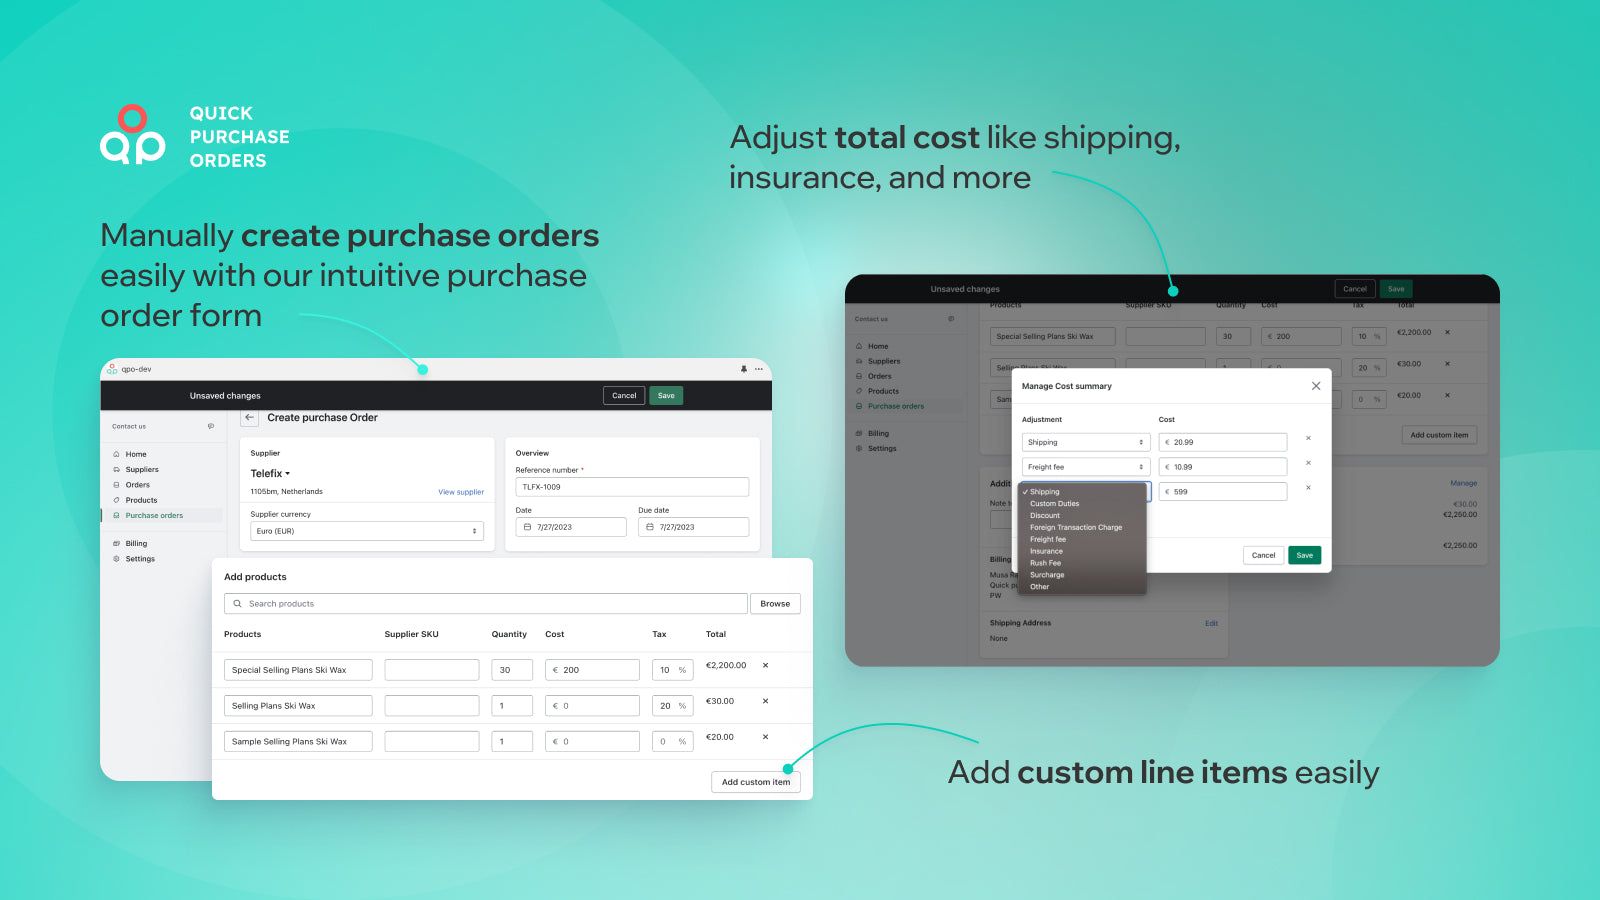 Use the feature rich purchase order form